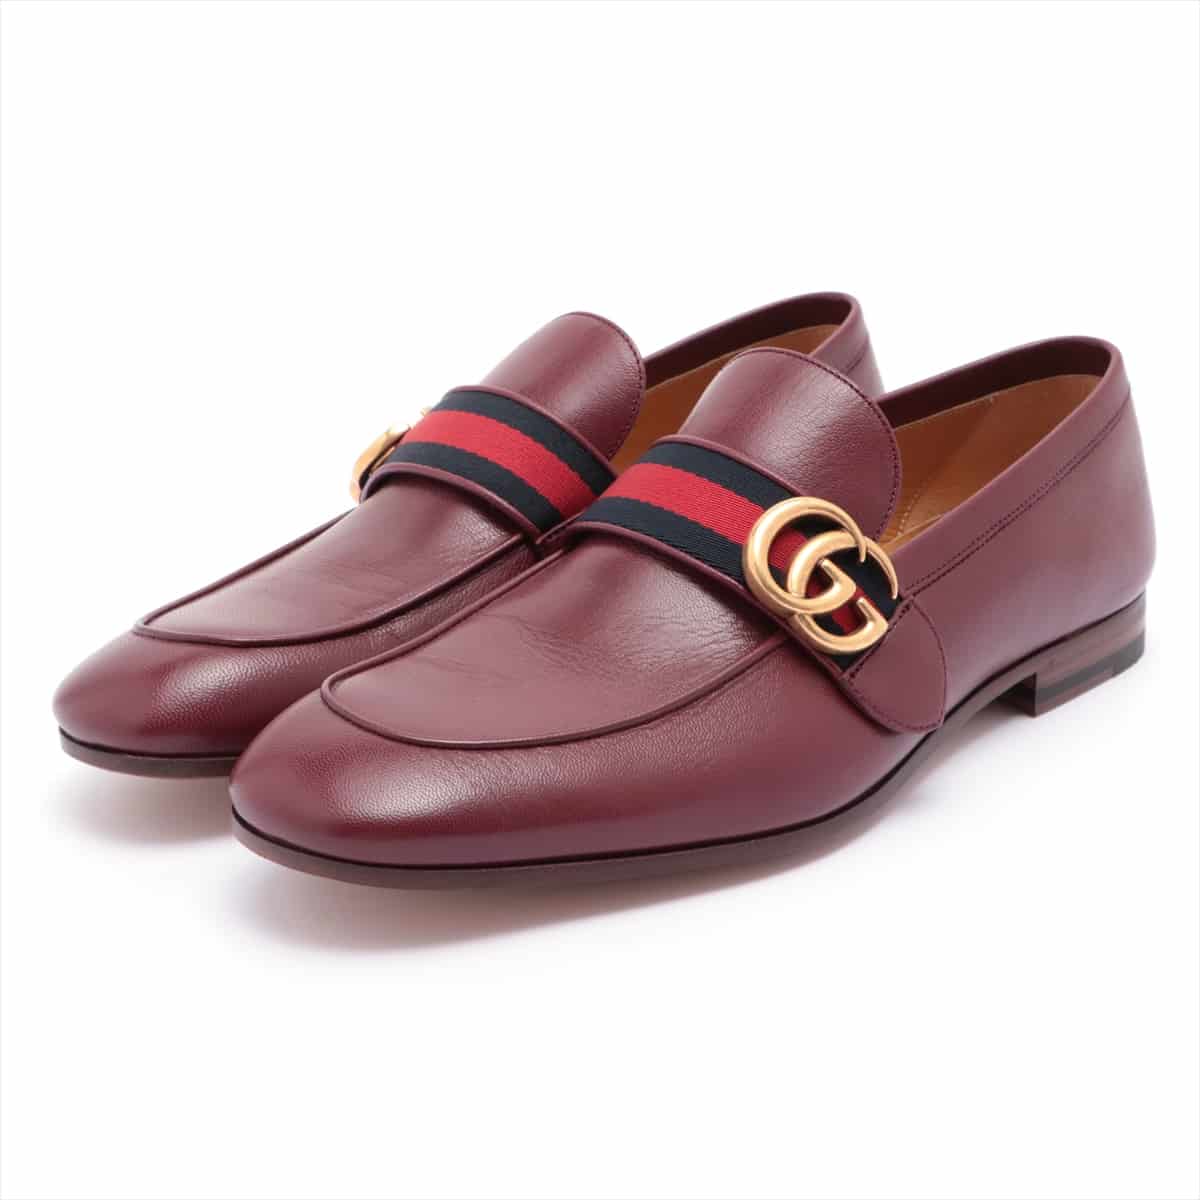 Gucci Sherry Line Leather Loafer 7 1/2 Men's Bordeaux 428609 GG Marmont